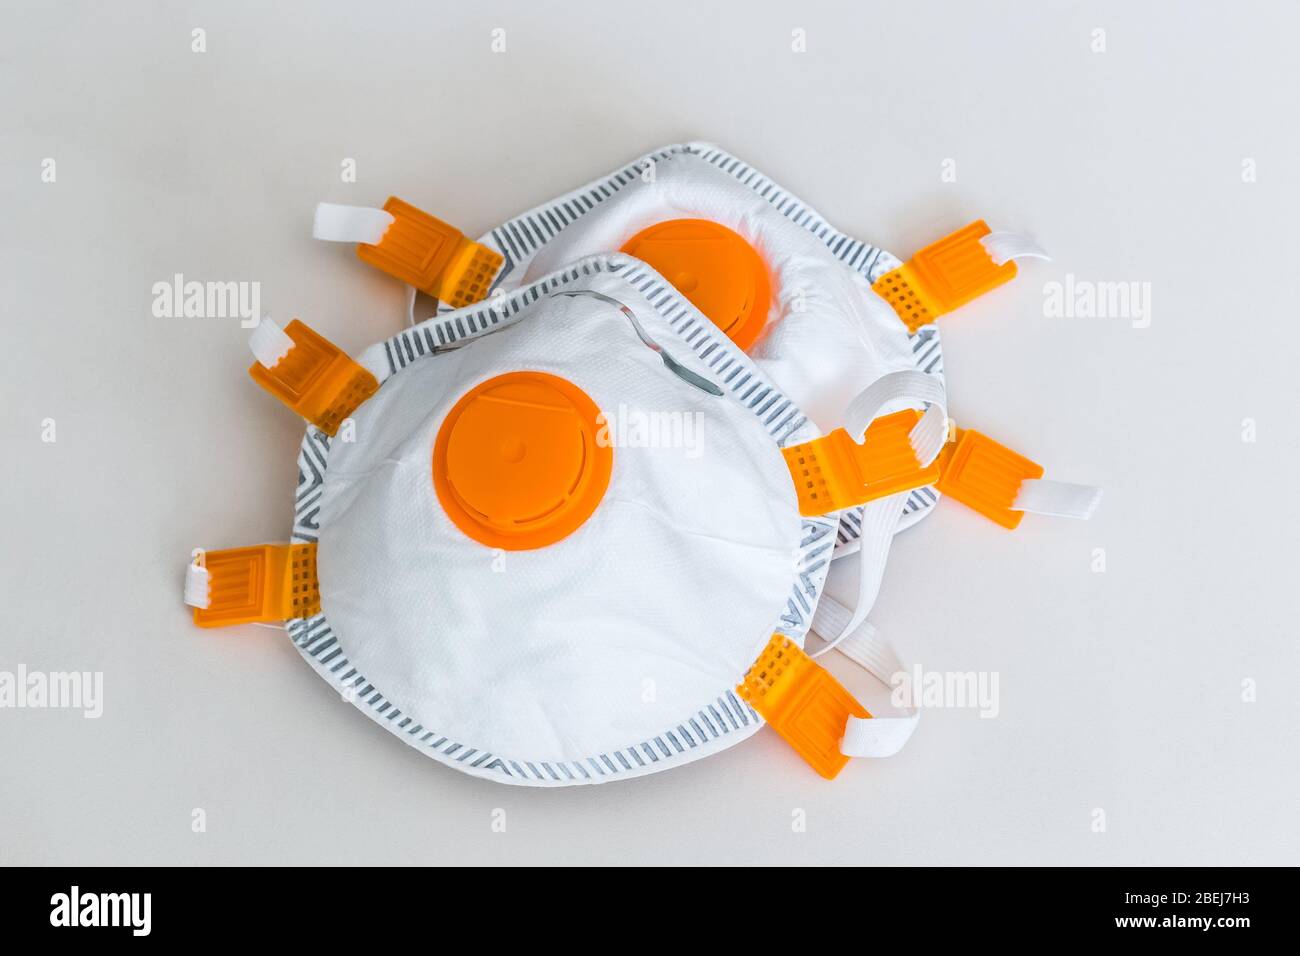 Protective respire face mask against the virus, coronavirus epidemics. Prevention of the risk of biological contamination. Stock Photo